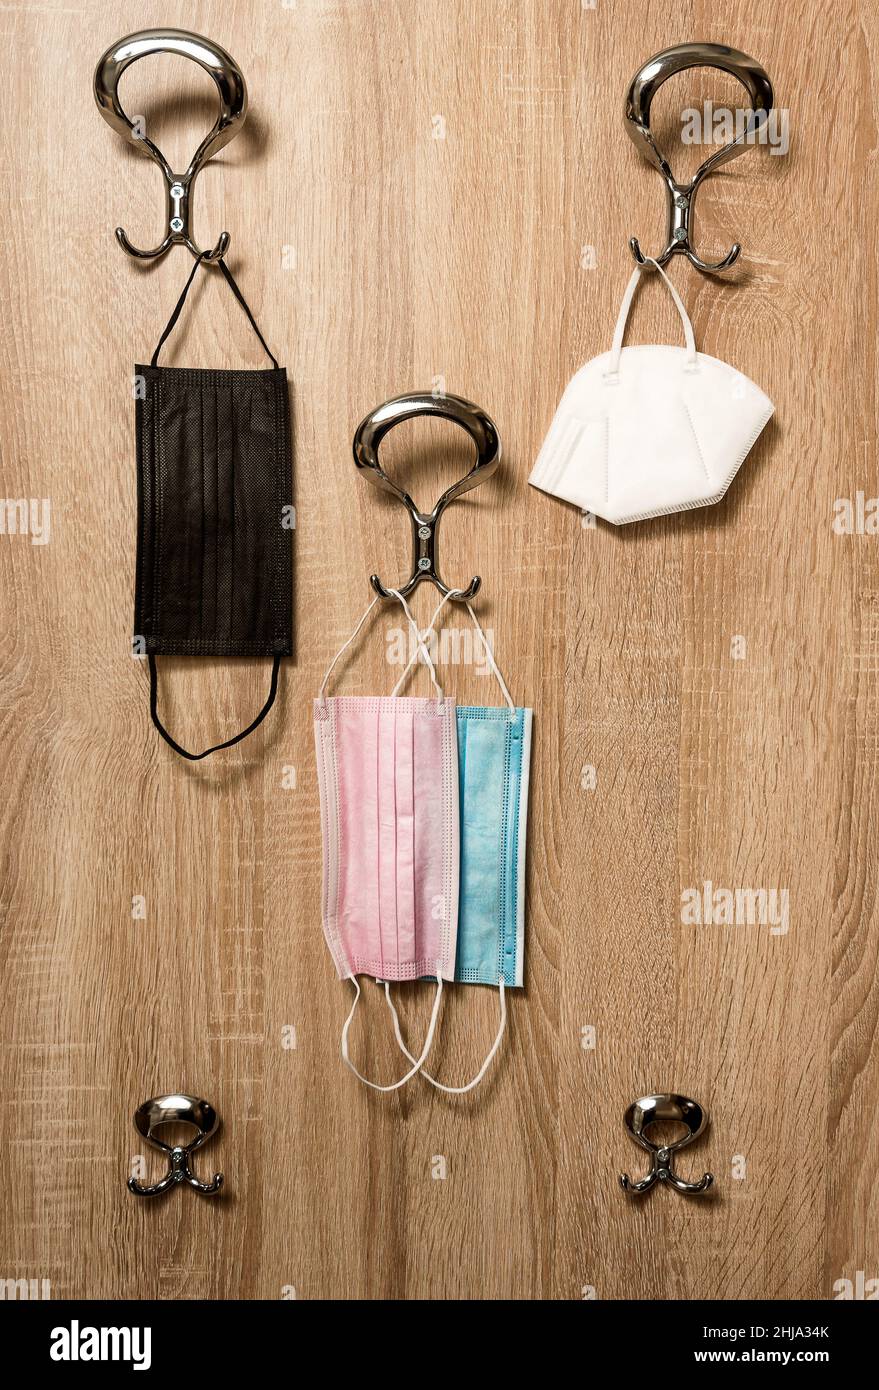 Protective surgical face masks on anteroom coat hanger stand during covid-19 pandemics Stock Photo